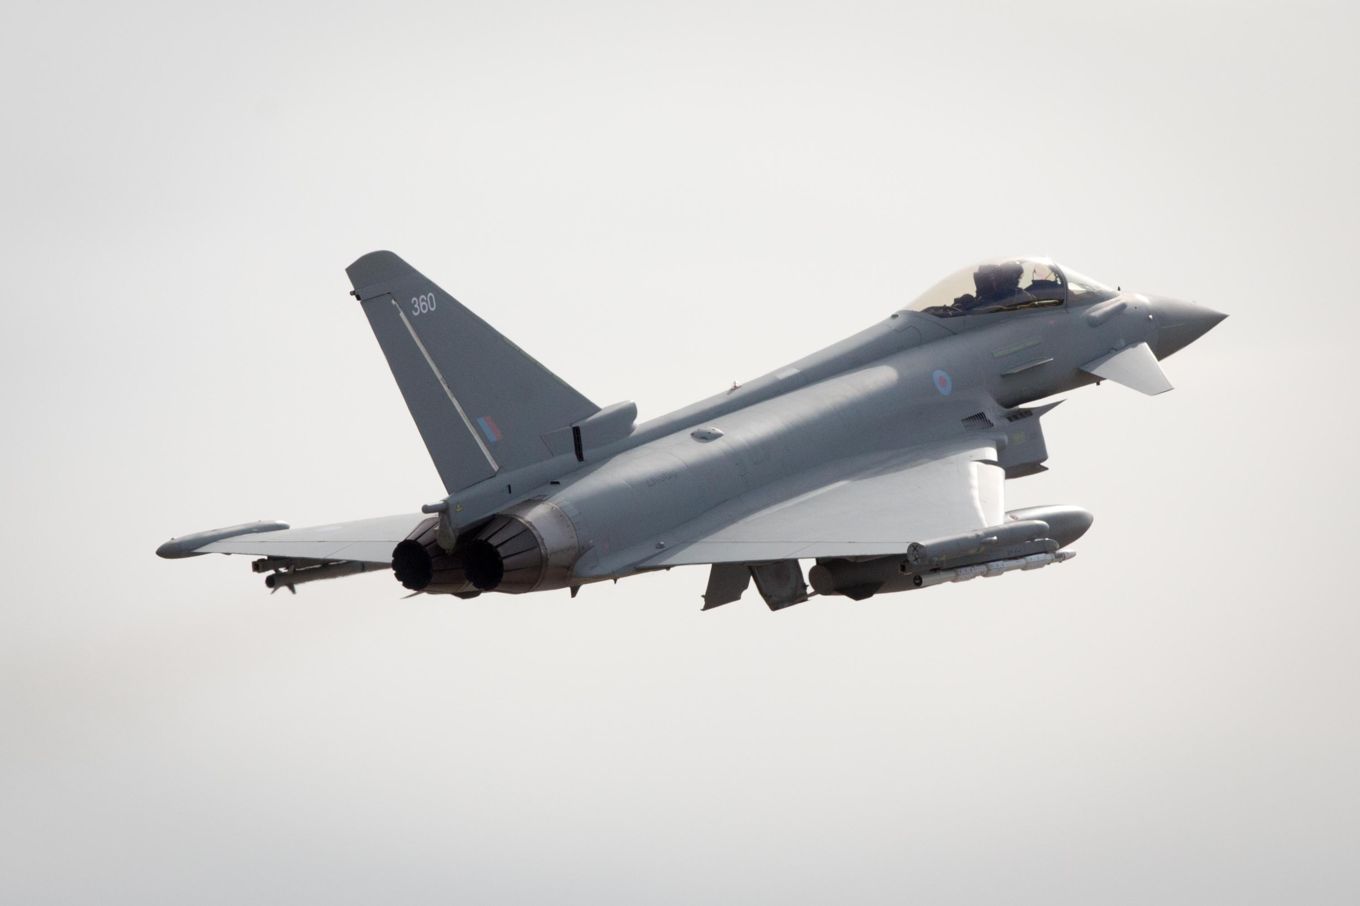 RAF Eurofighter Typhoon FGR4 in take-off. Royal Air Force aircraft and personnel have begun an exercise in Sweden alongside eight other nations to train together in building collective security.